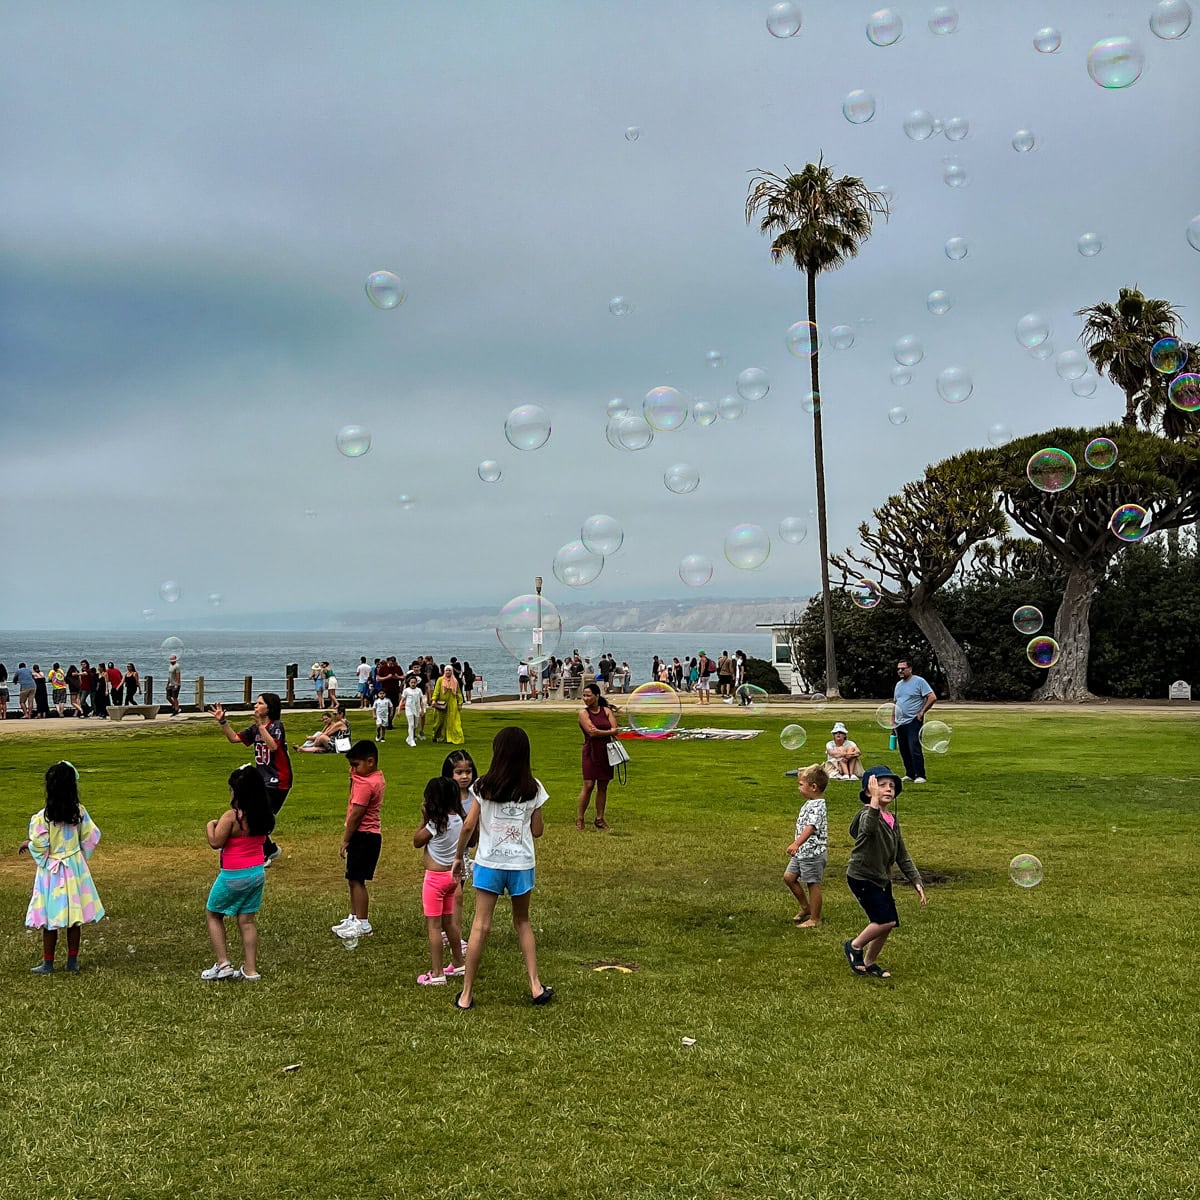 Kids playing at Scripps Parkway in La Jolla Cove, San Diego